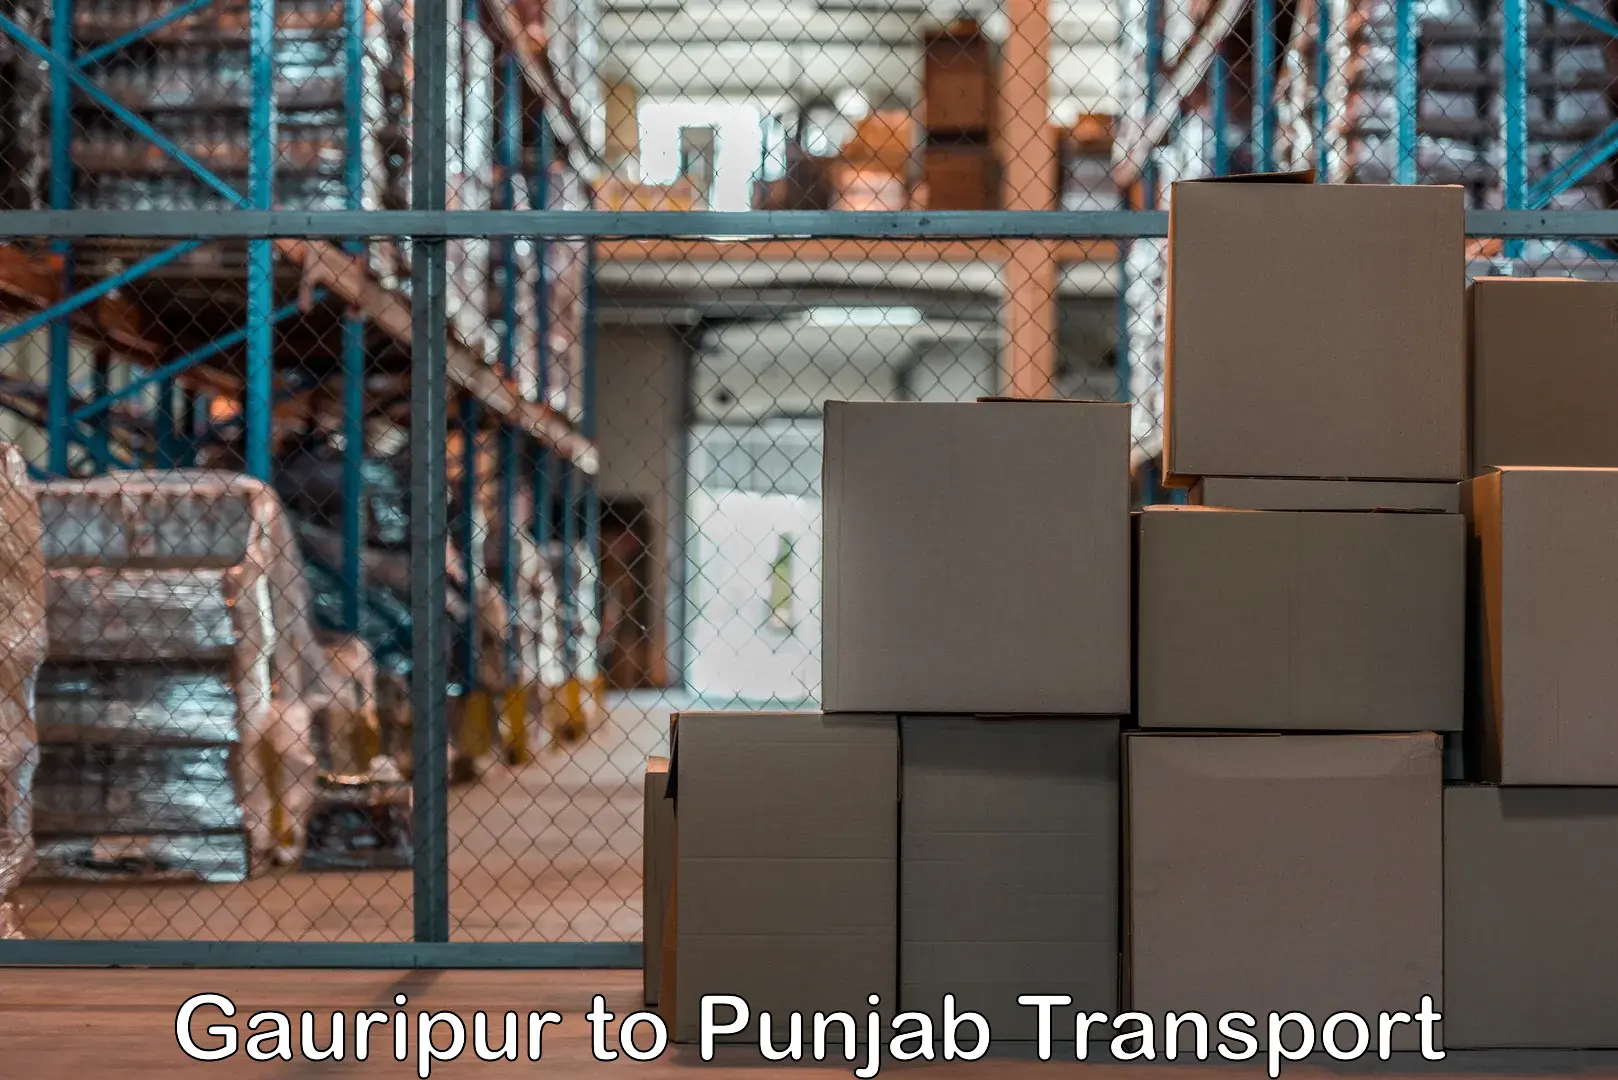 Container transport service Gauripur to Khanna